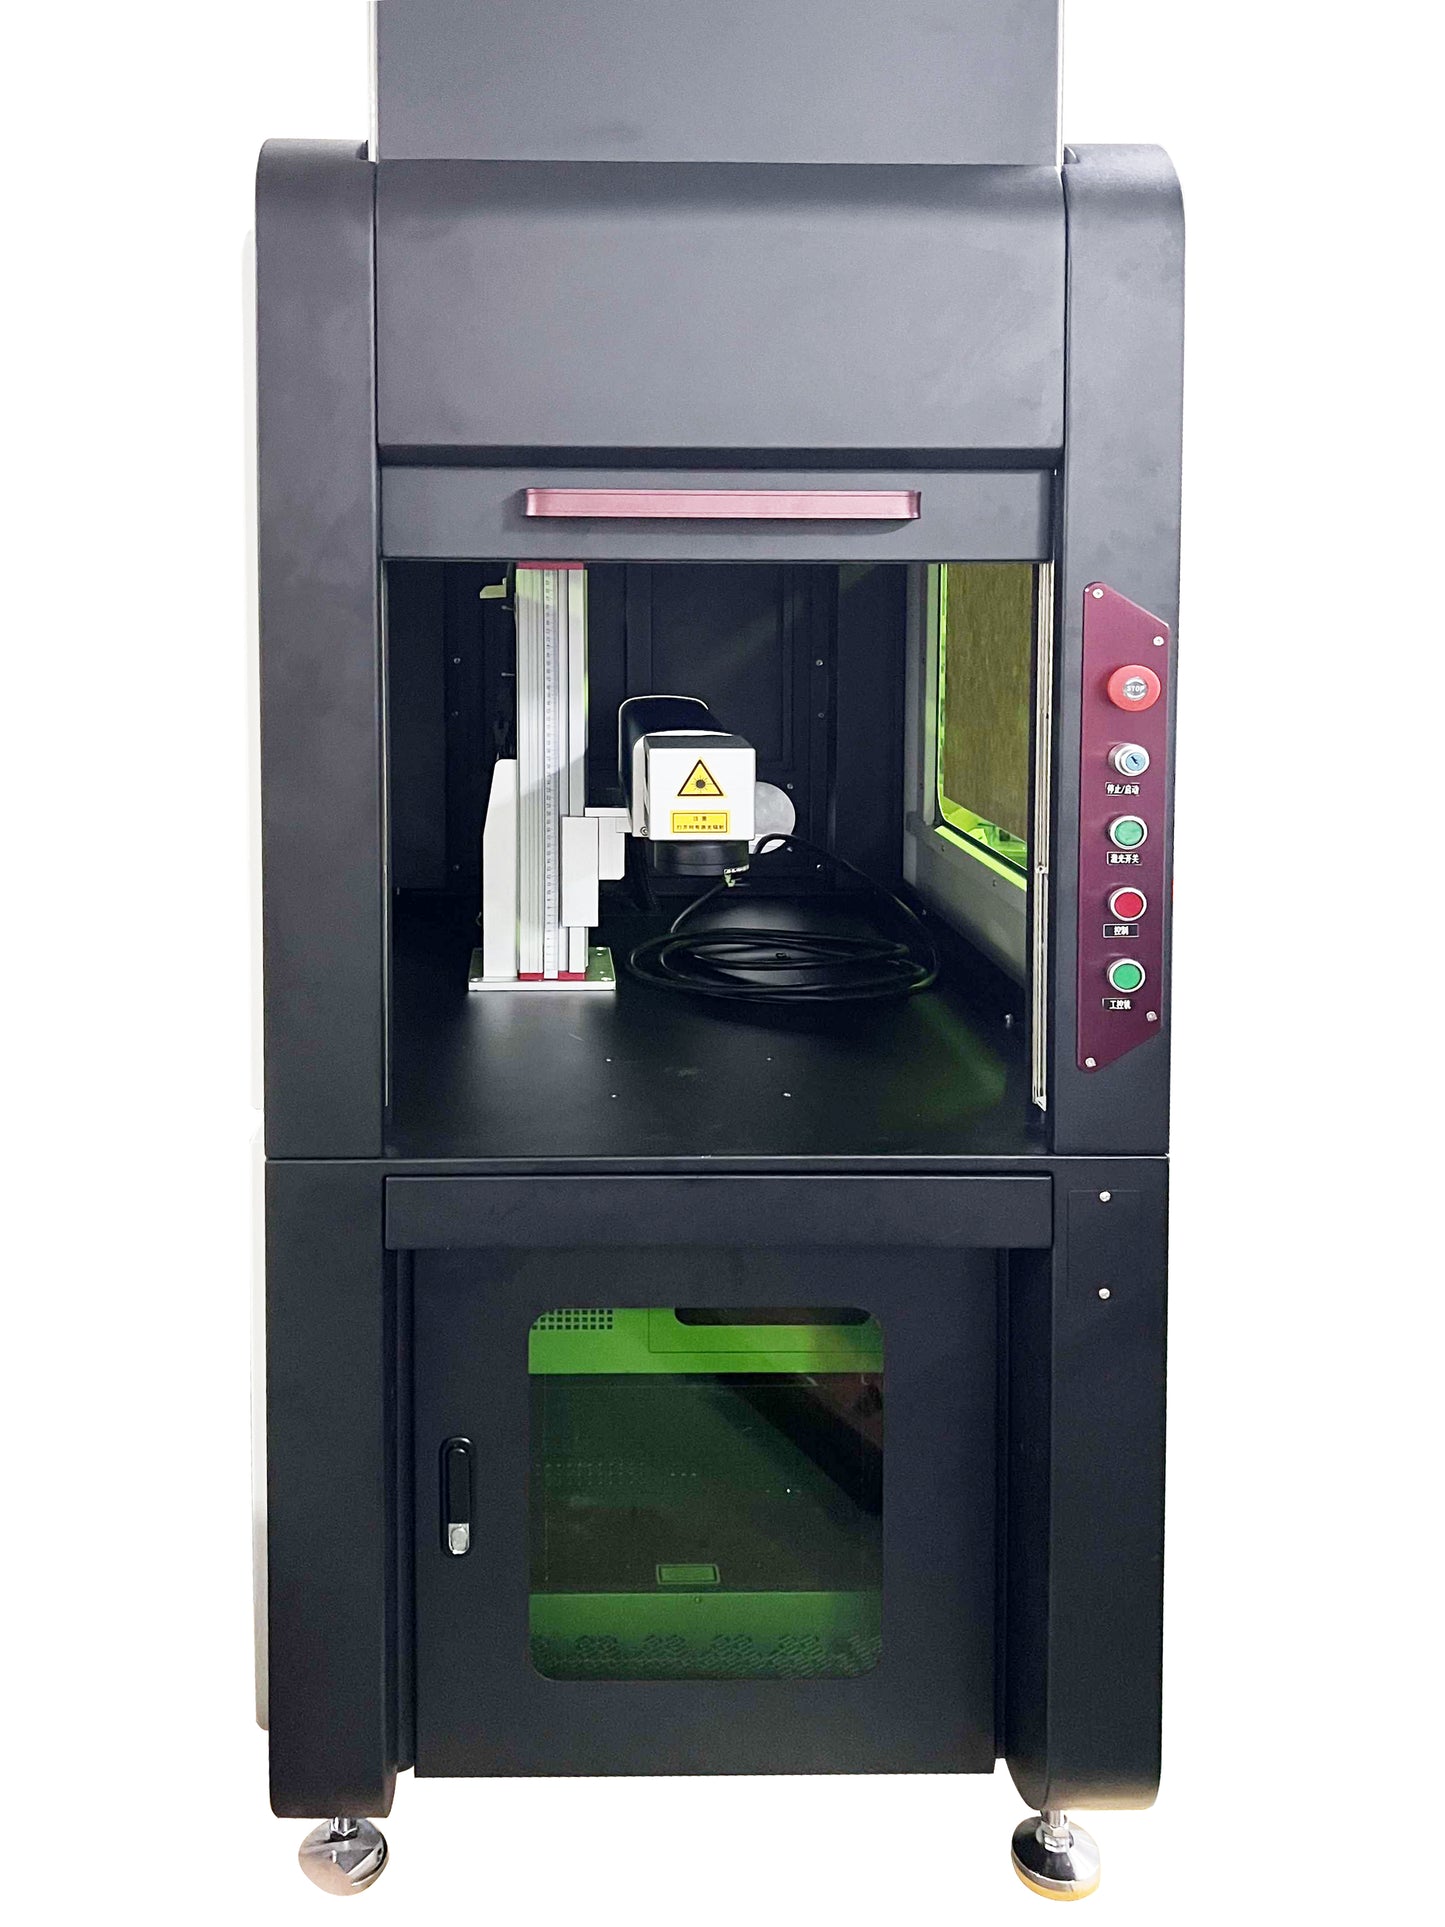 MOPA Fiber Laser Engraver 30W 60W 100W Enclosed & Cabinet Type with Rotary Axis for Metal Color Marking Gold Sliver Engraving Cutting